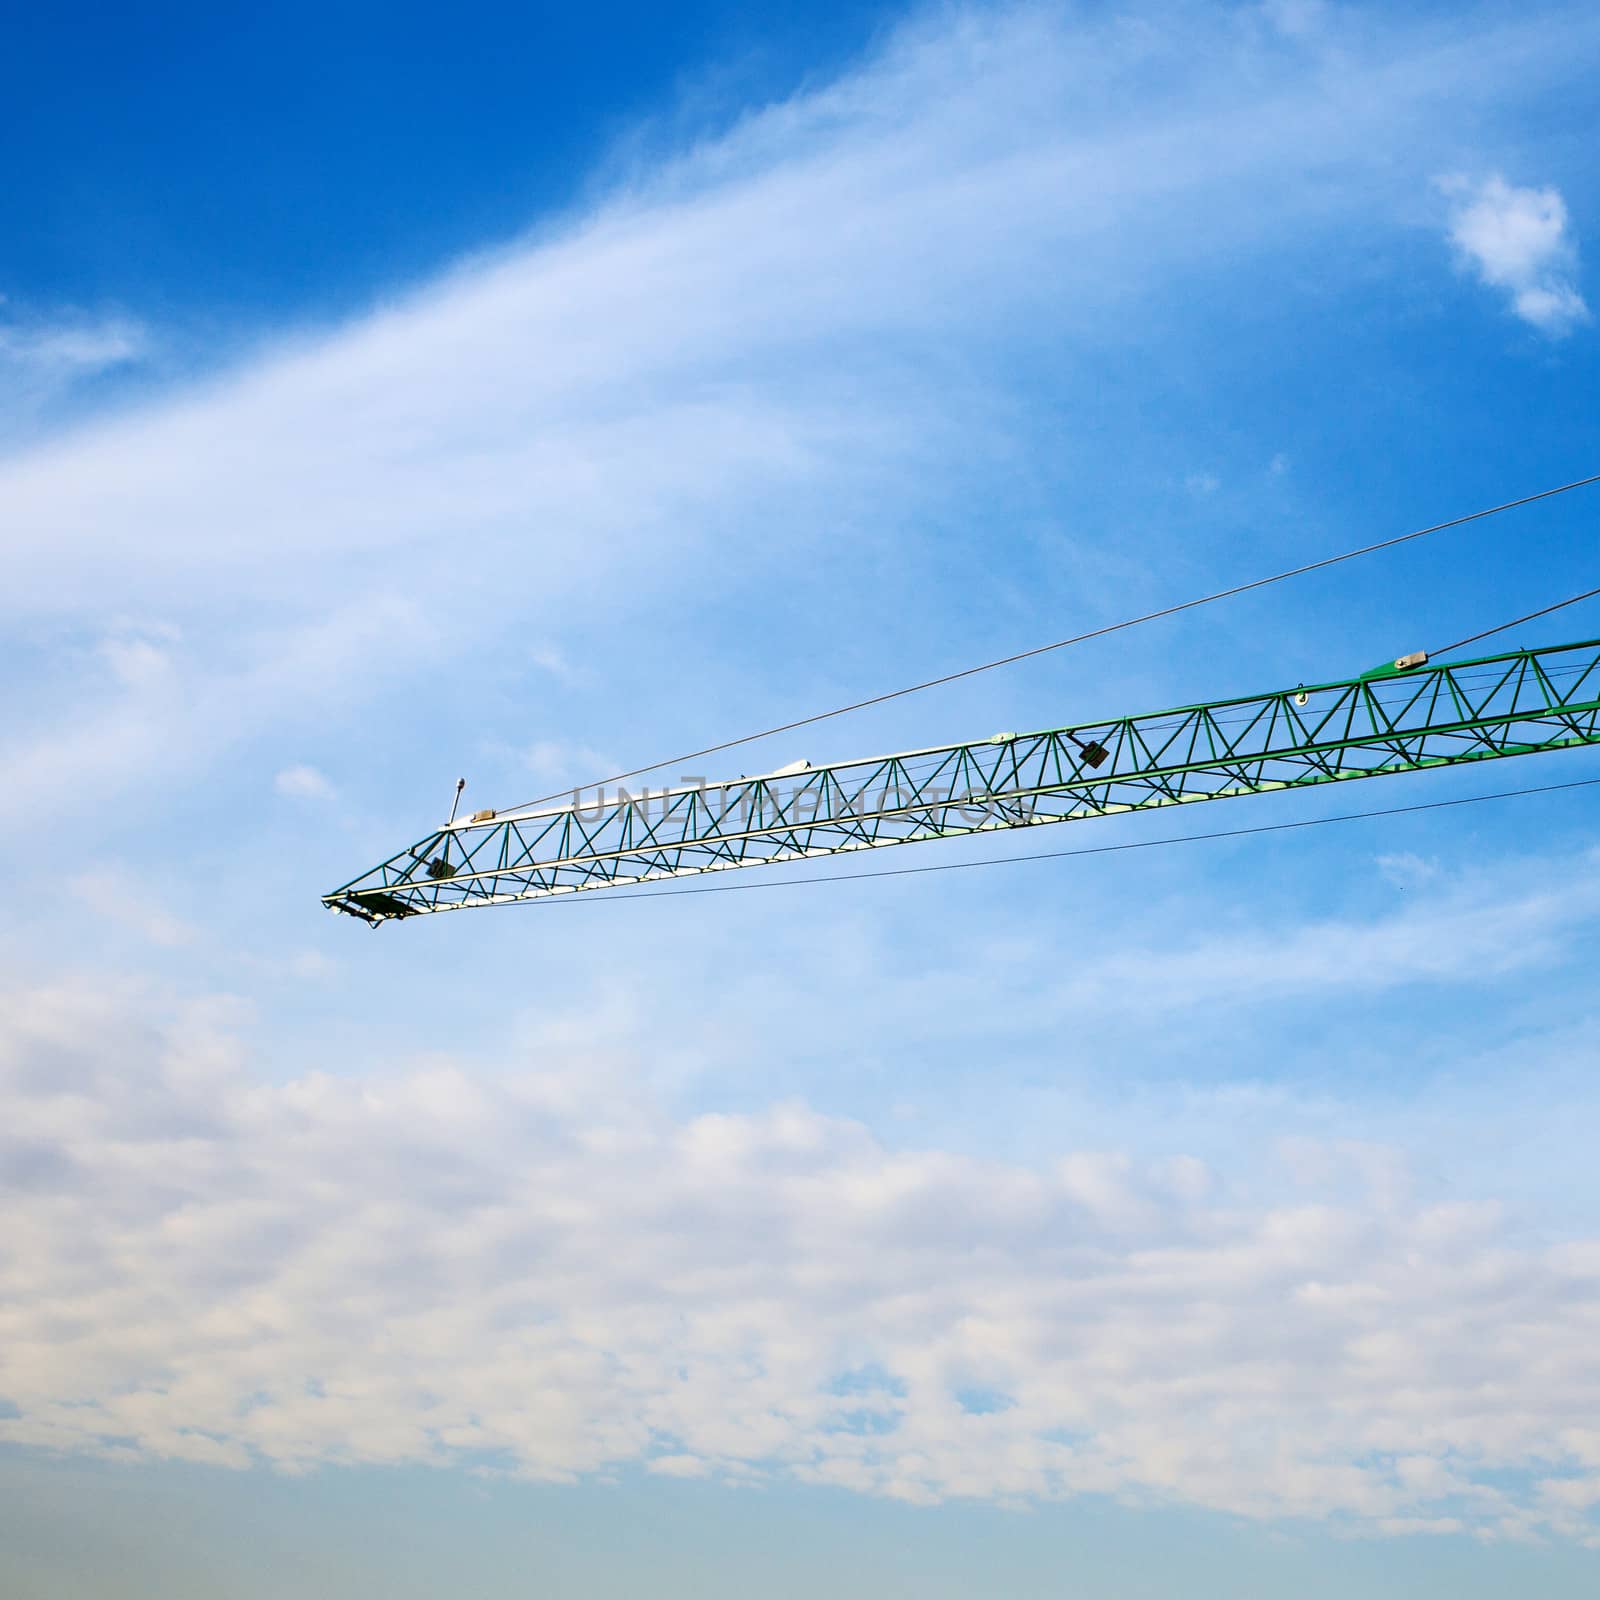 tower crane above the city on a background of blue sky